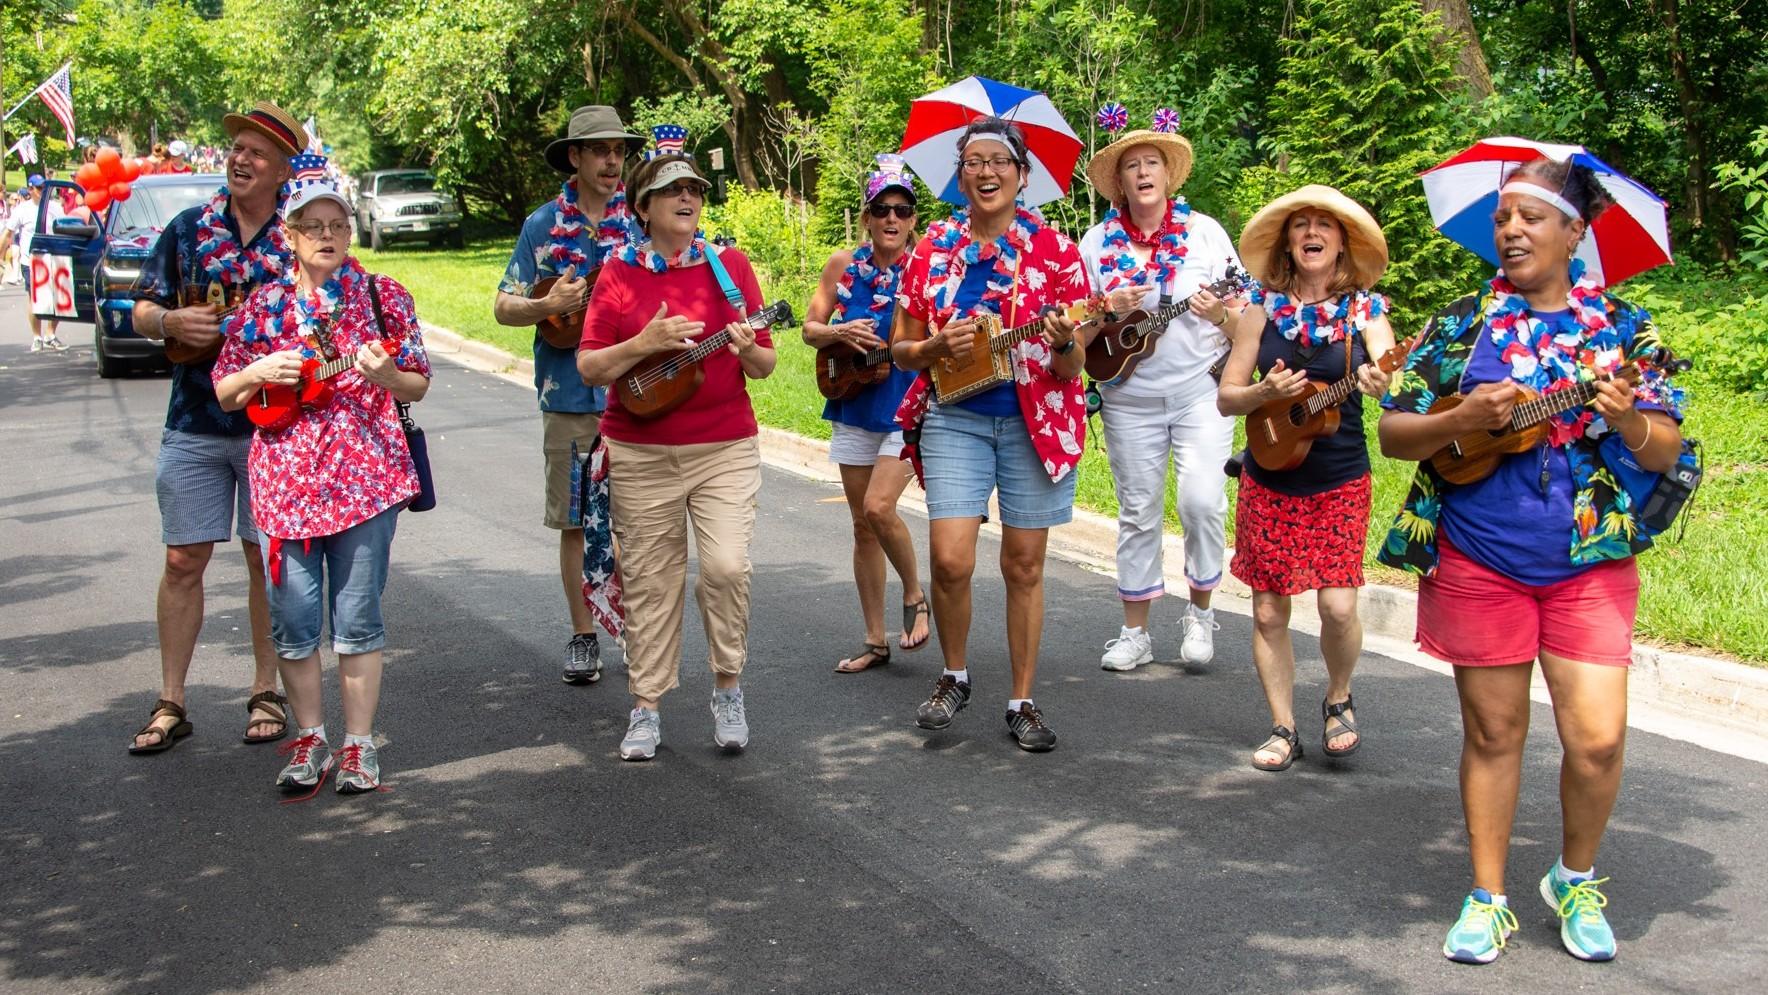 A Maryland-based ukulele marching band performs during a 2019 Fourth of July parade.